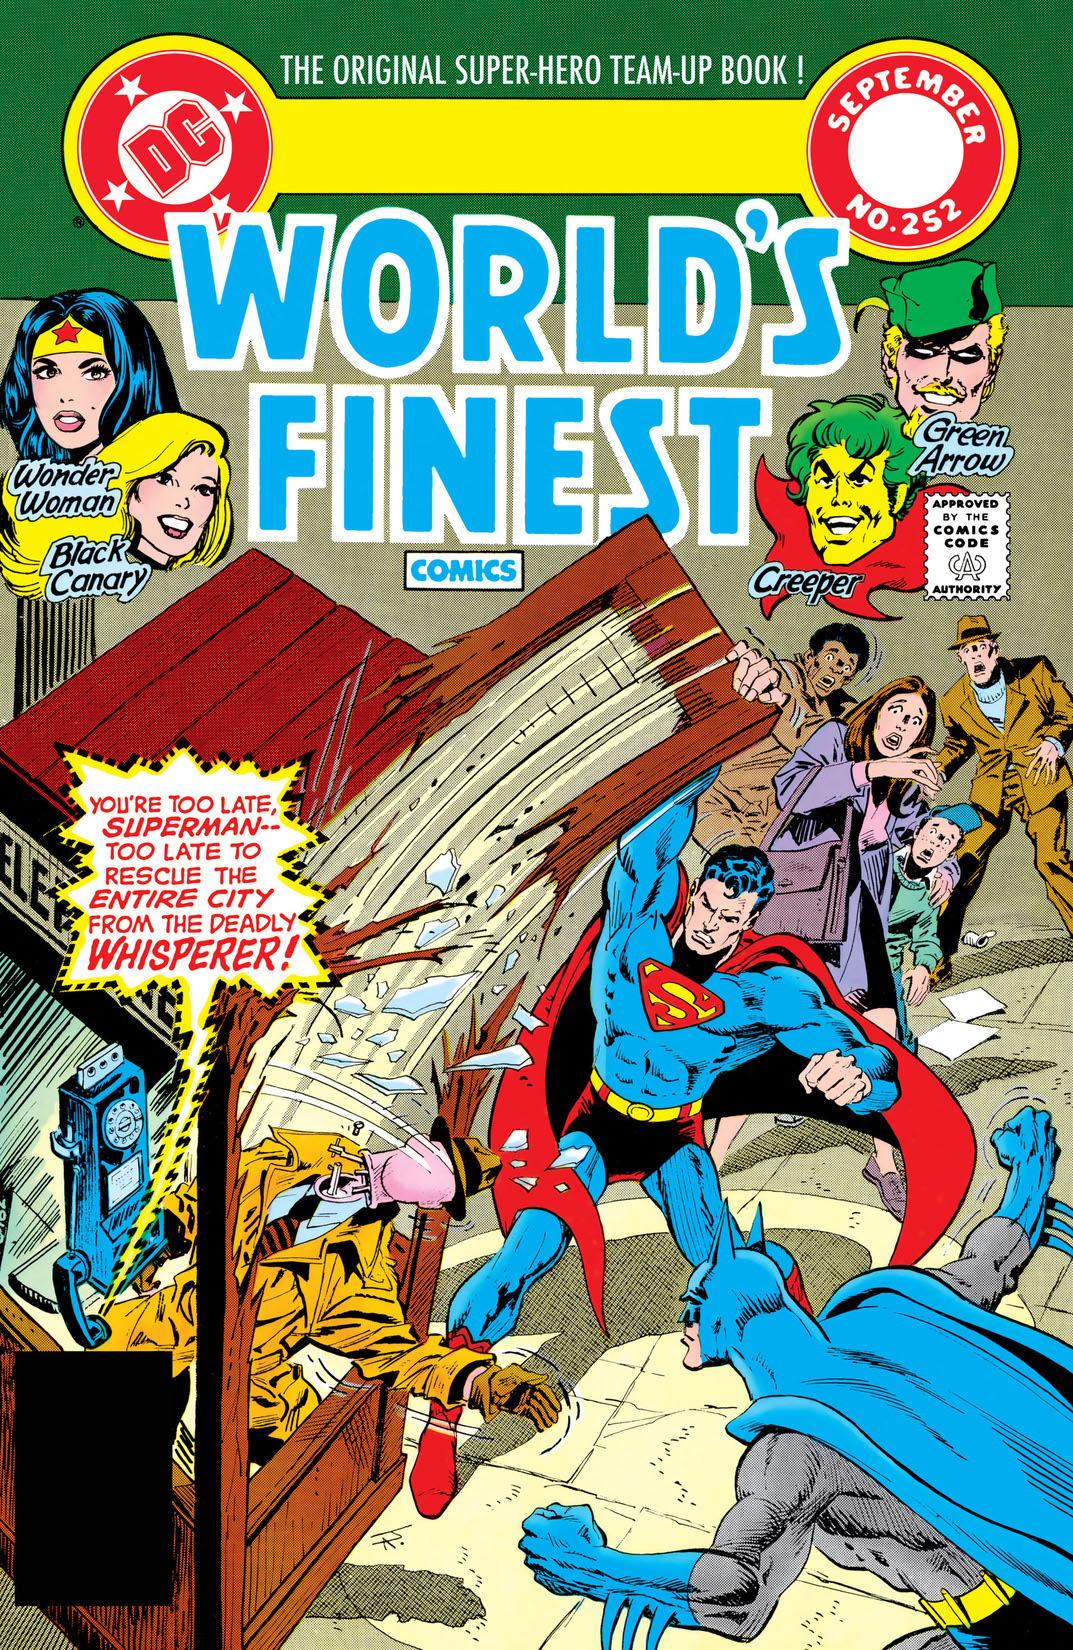 World's Finest Comics (1941-) #252 preview images